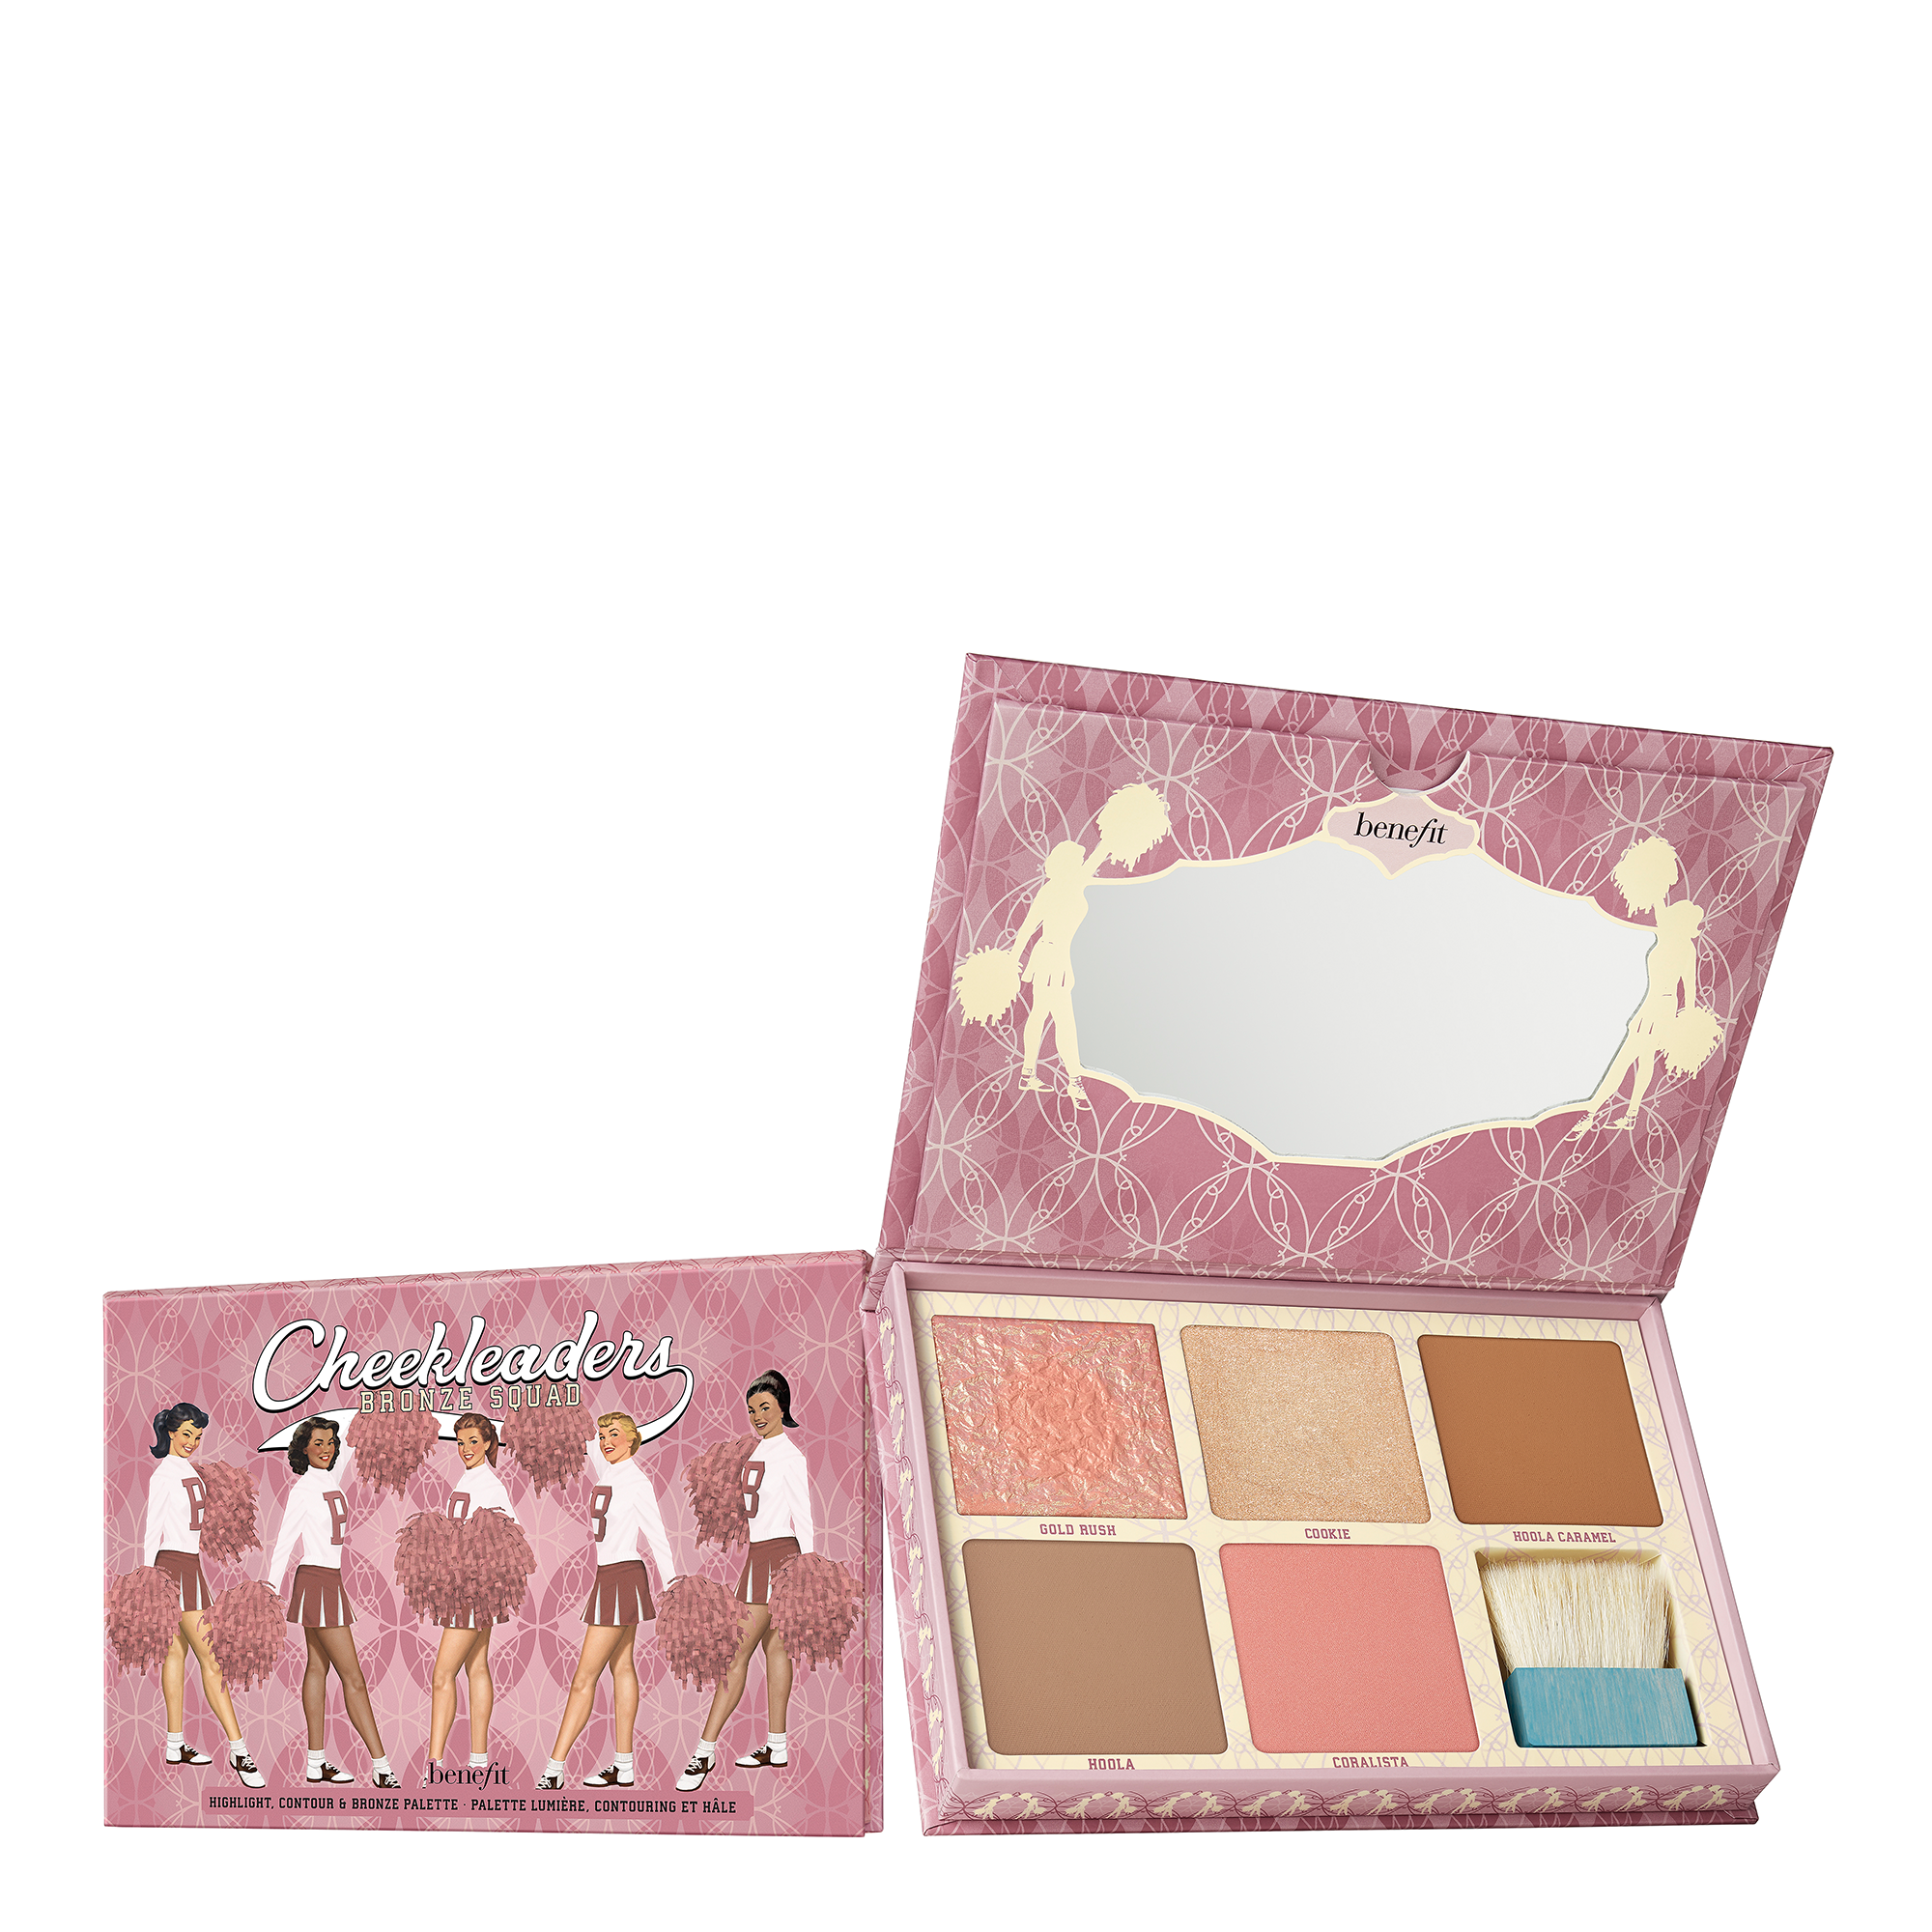 Benefit Cosmetics Launches Hoola For Deeper Skin